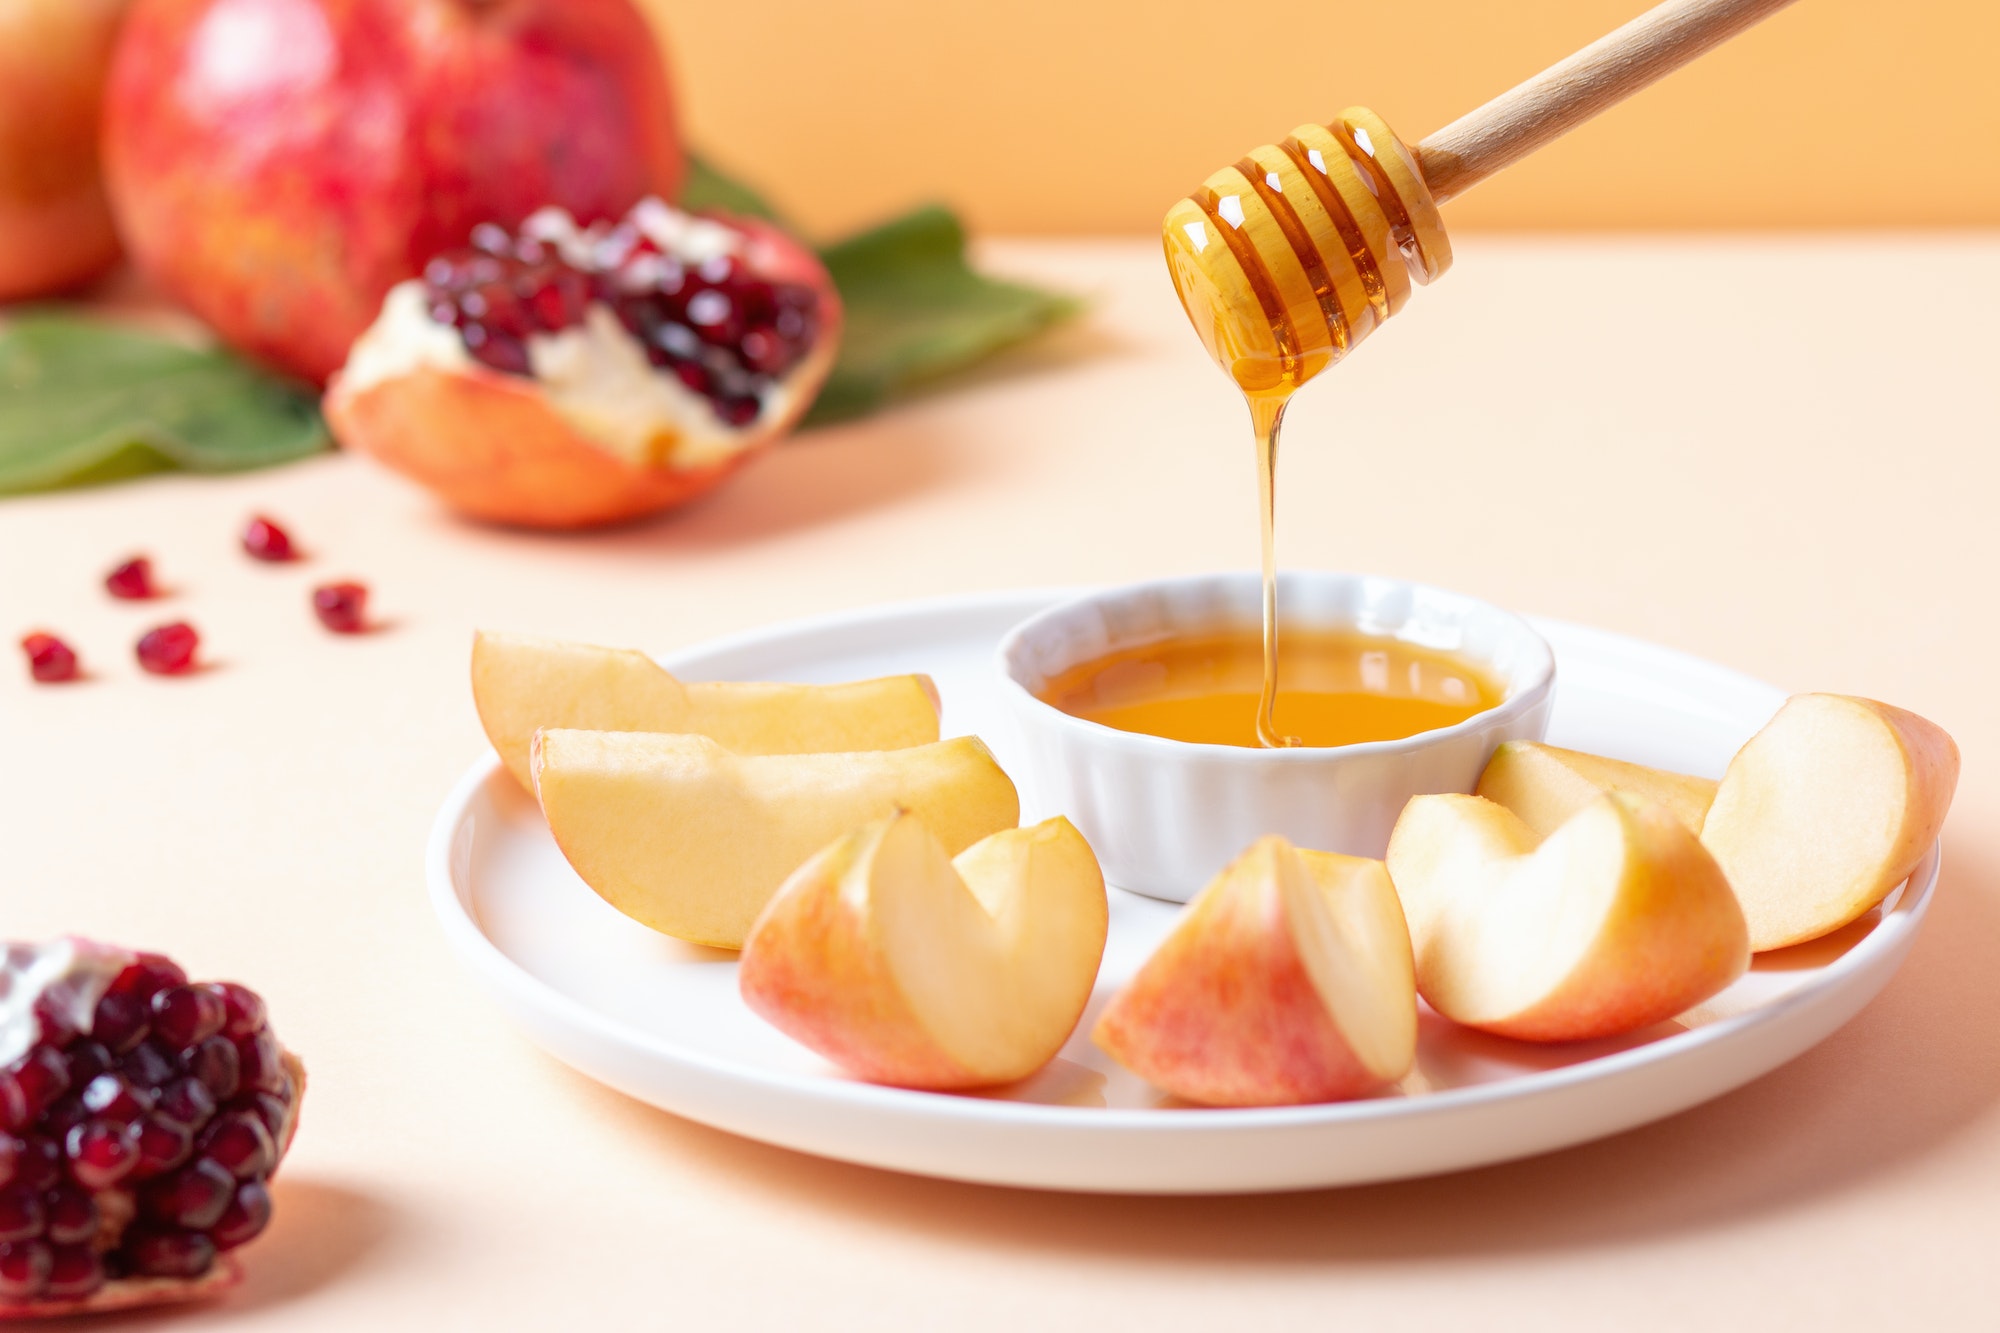 Closeup of plate with apples and honey for Jewish holiday Rosh Hashanah